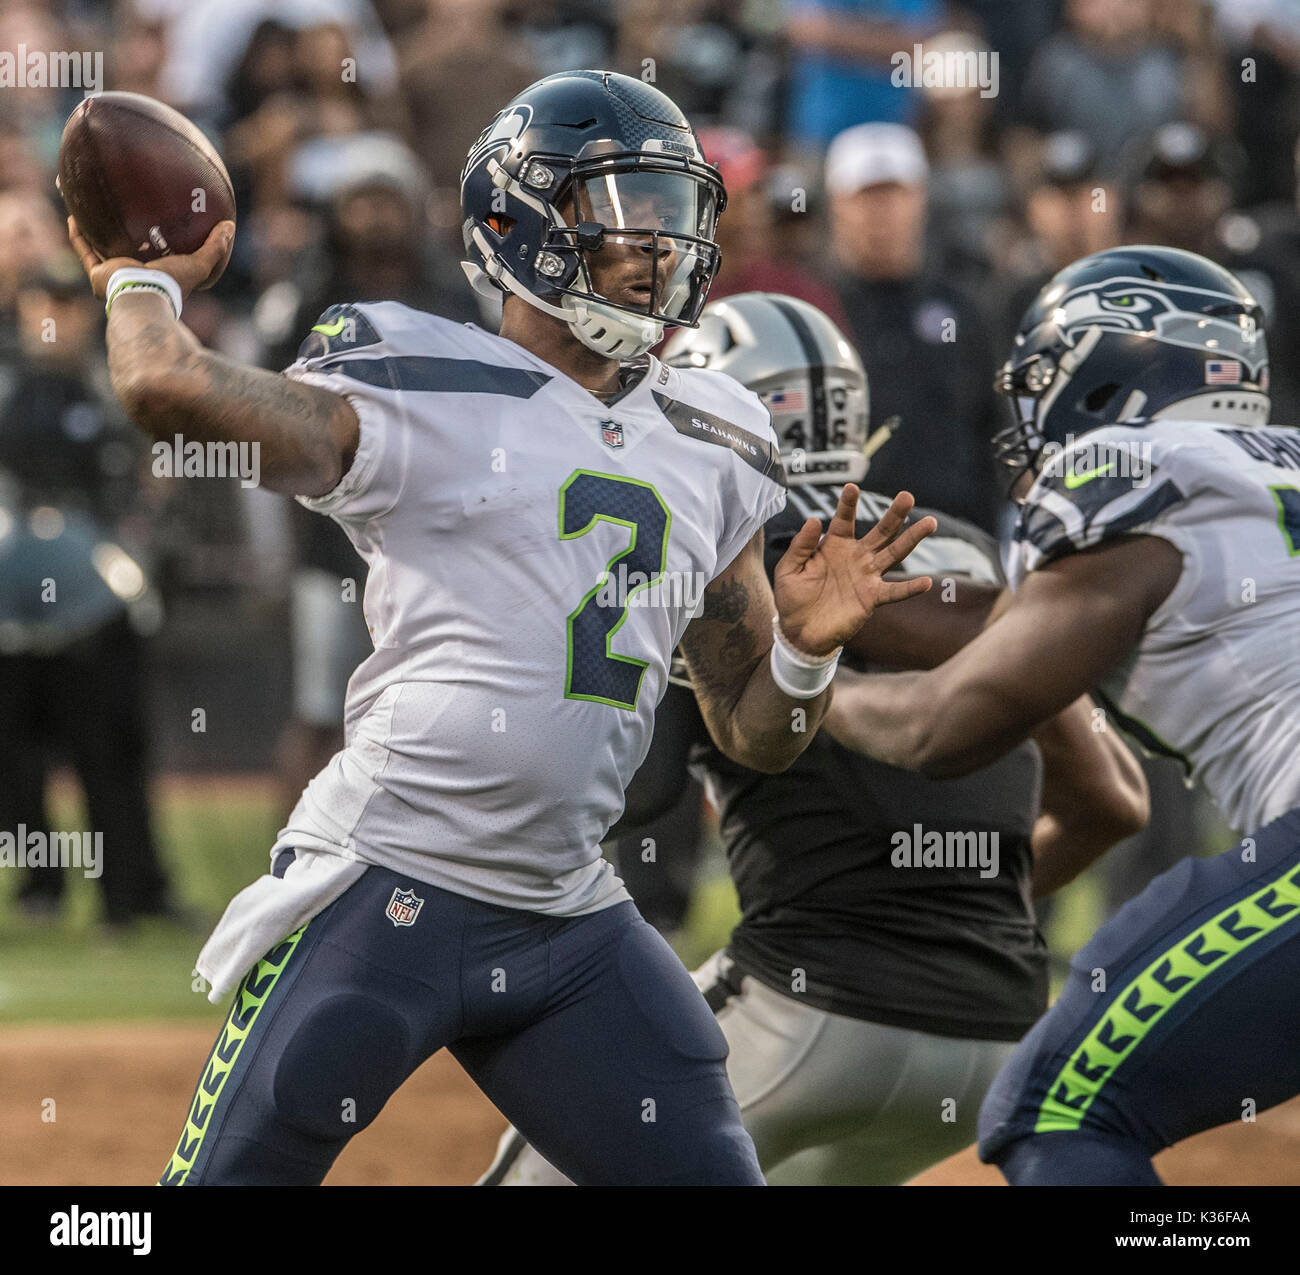 August 31, 2017: Seattle Seahawks quarterback Trevone Boykin (2) fires pass down field on Thursday, August 31, 2017, at Oakland-Alameda County Coliseum in Oakland, California. The Seahawks defeated the Raiders in a preseason game 17-13. Al Golub/CSM Stock Photo